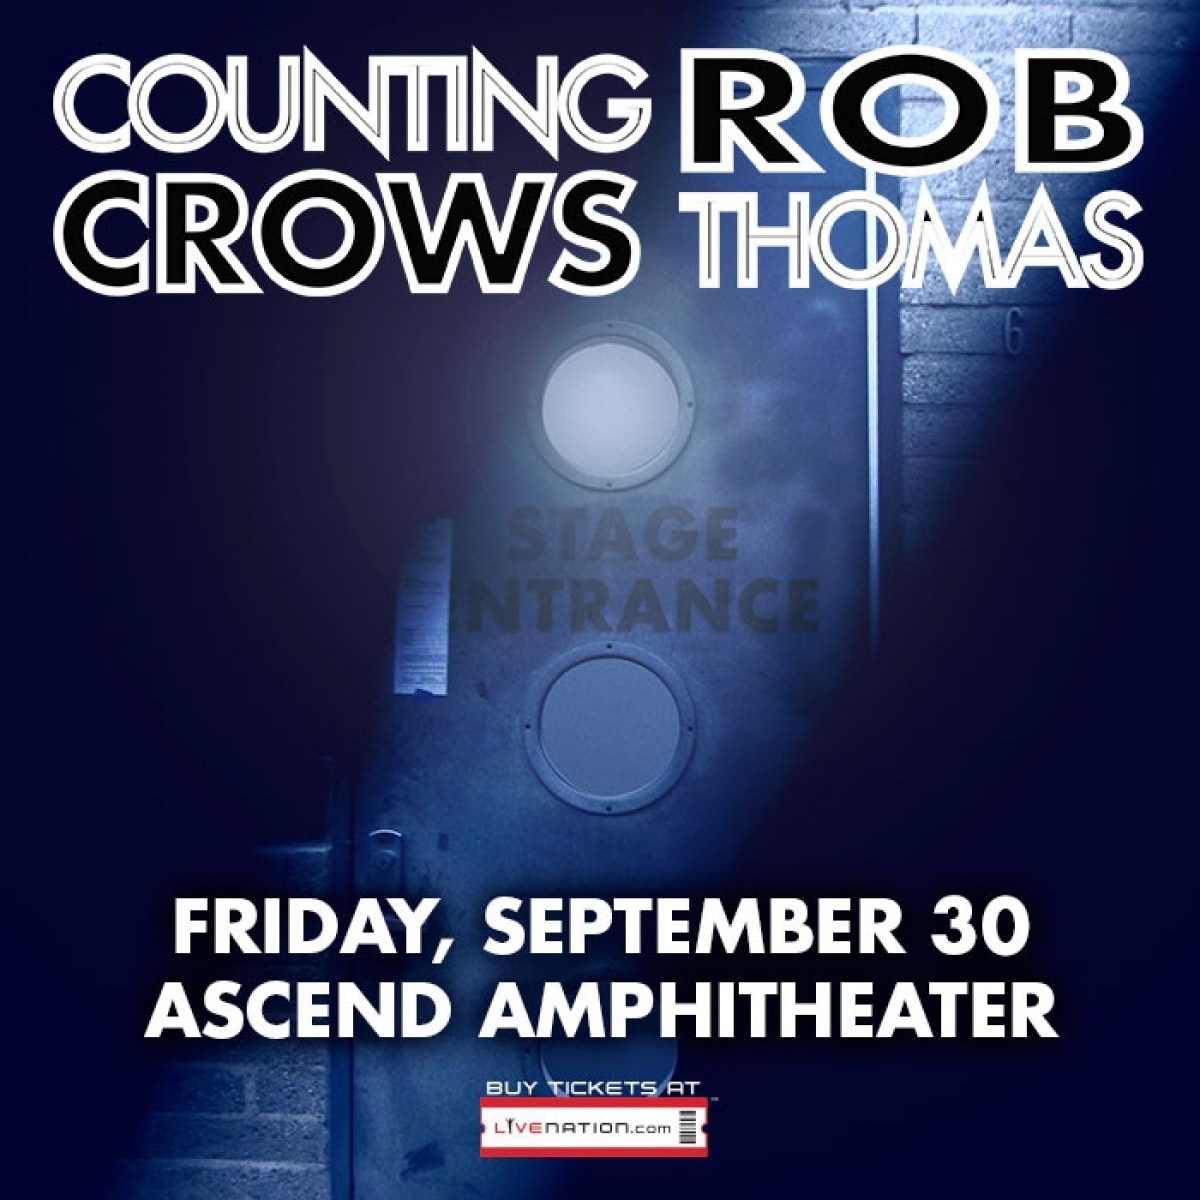 Counting Crows/Rob Thomas:  Register To Win